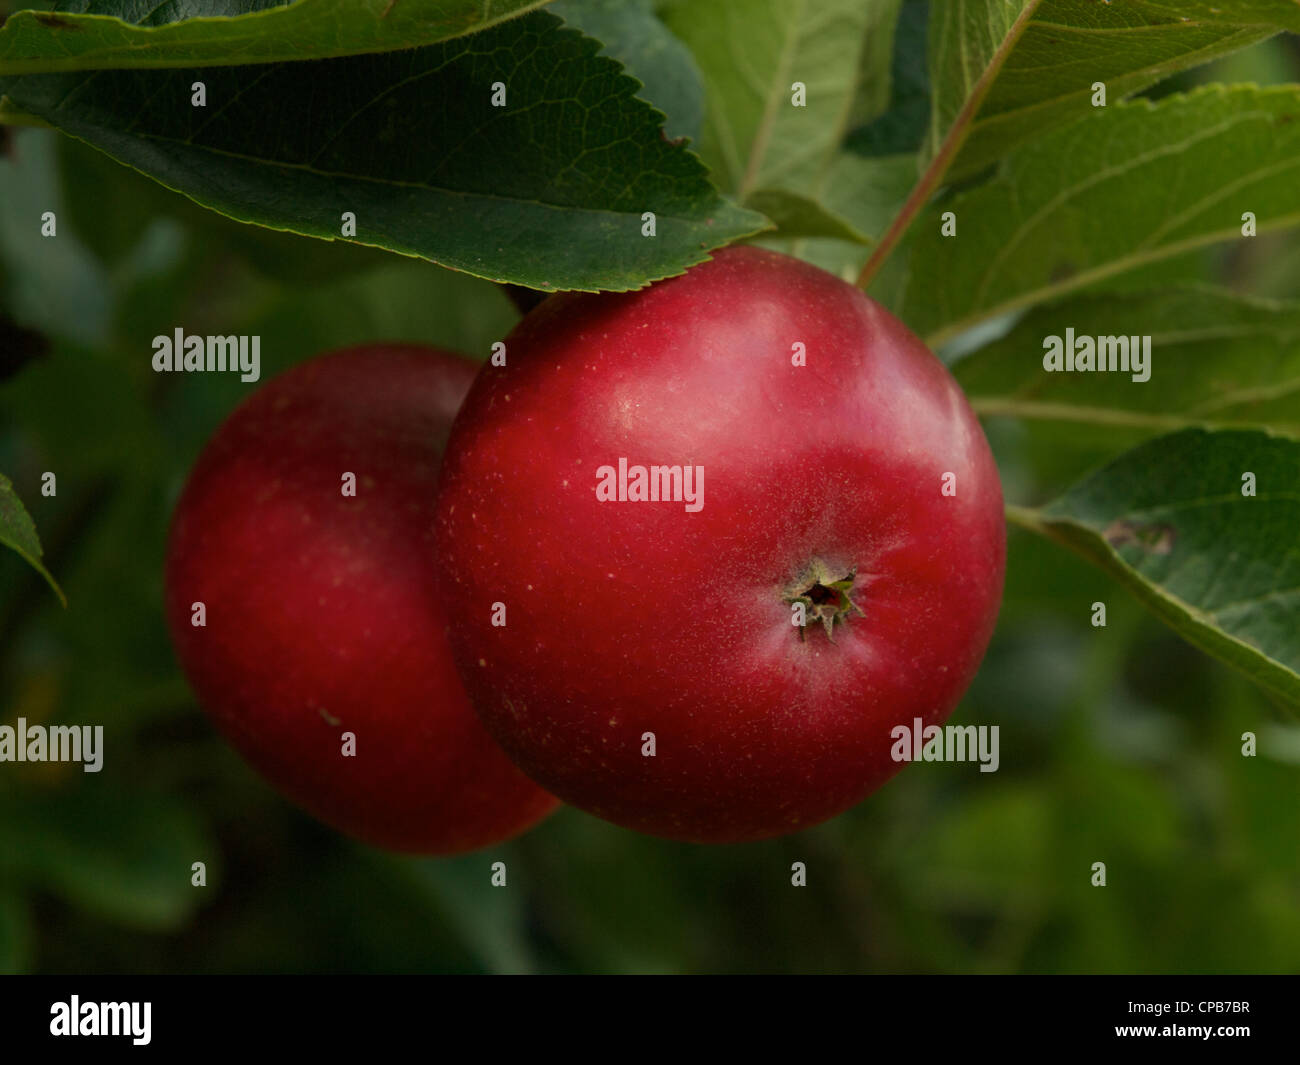 A pair of ripe red Discovery apples on the tree. Stock Photo